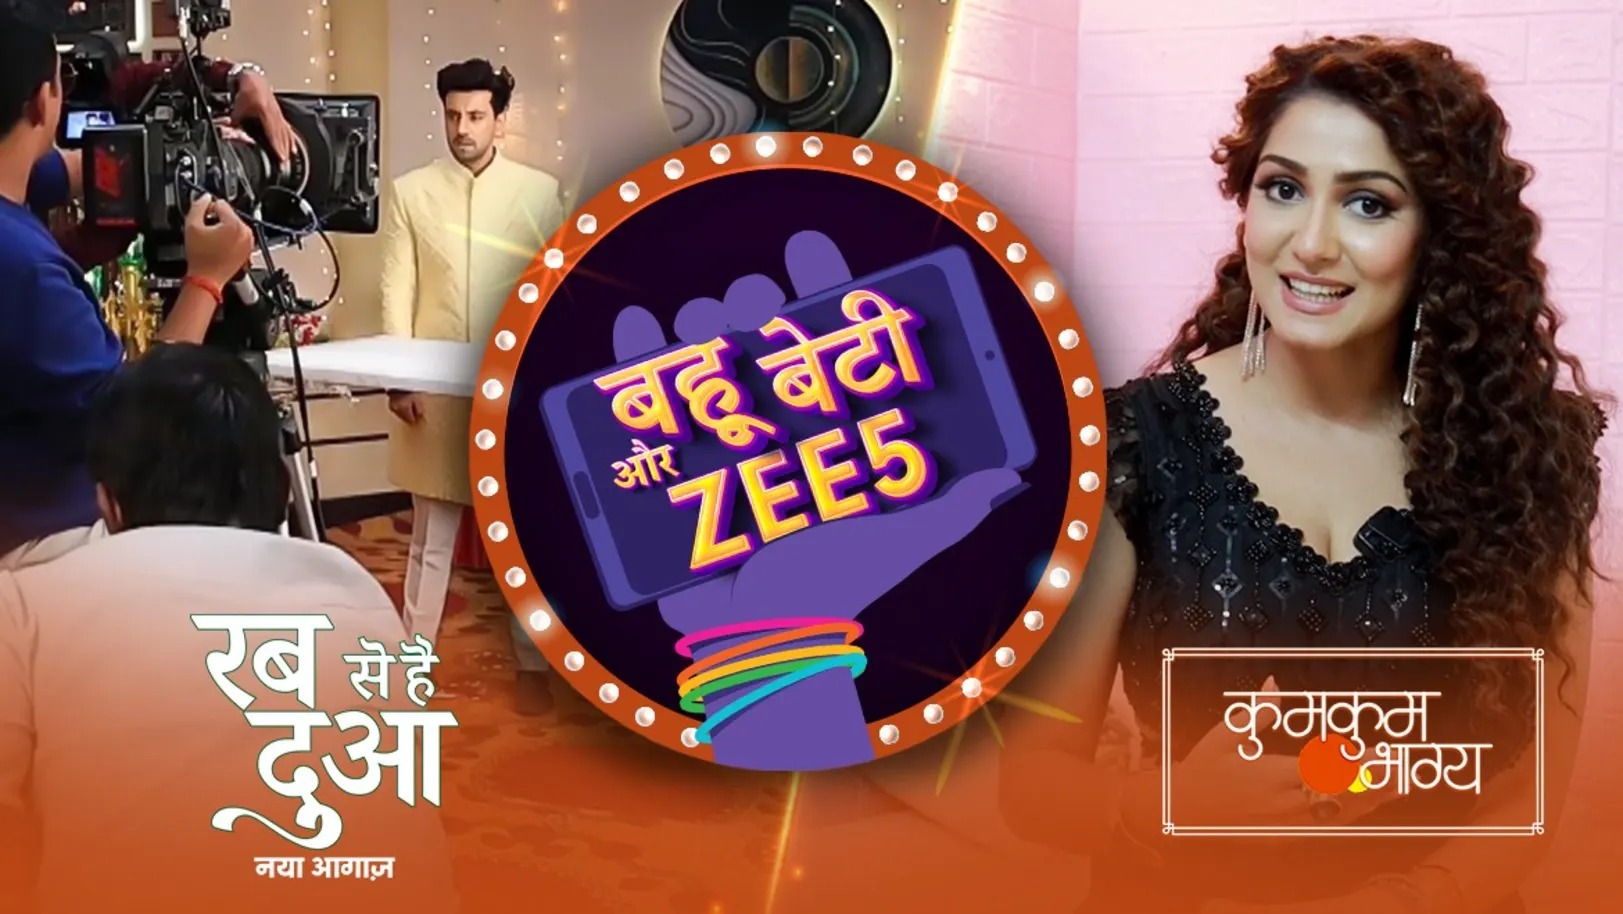 The Story behind Your Favourite Show | Behind the Scenes | Bahu Beti Aur ZEE5 Episode 1